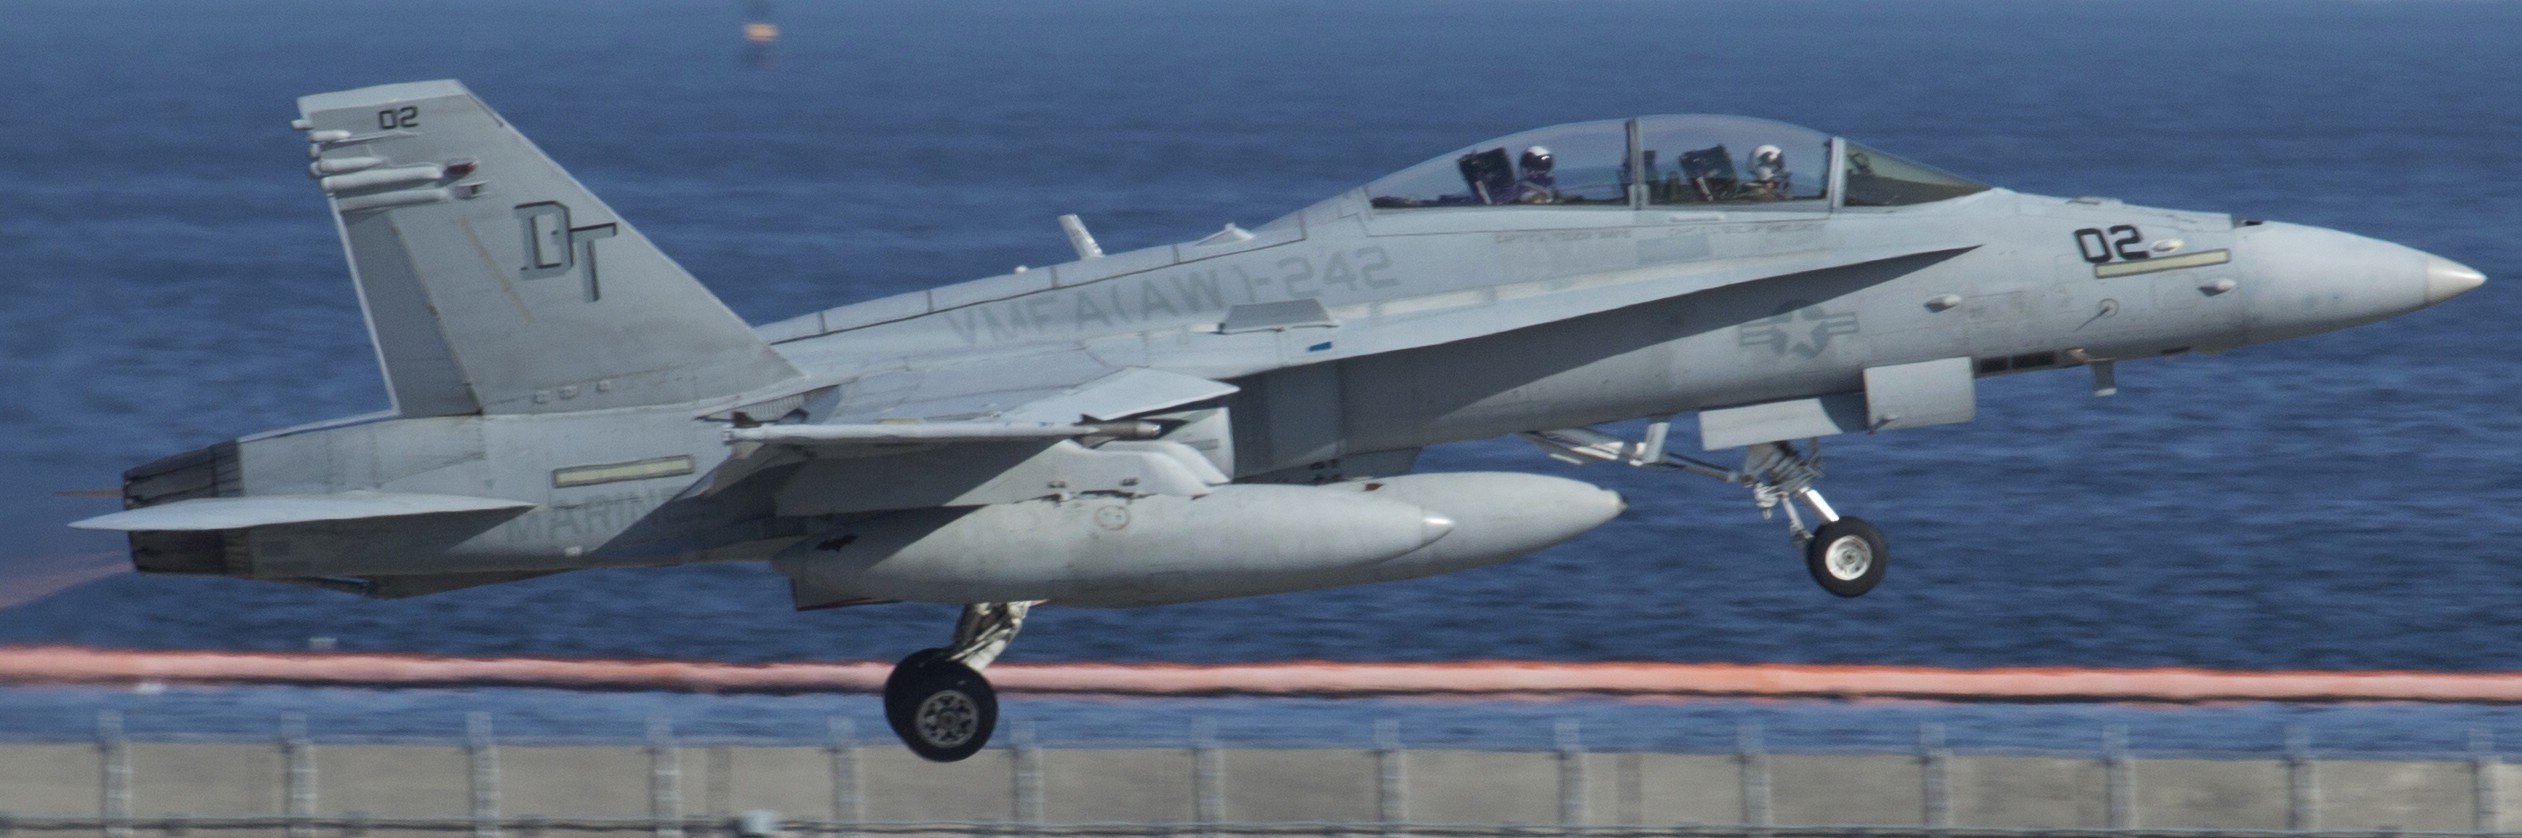 vmfa(aw)-242 bats marine all-weather fighter attack squadron usmc f/a-18d hornet 71